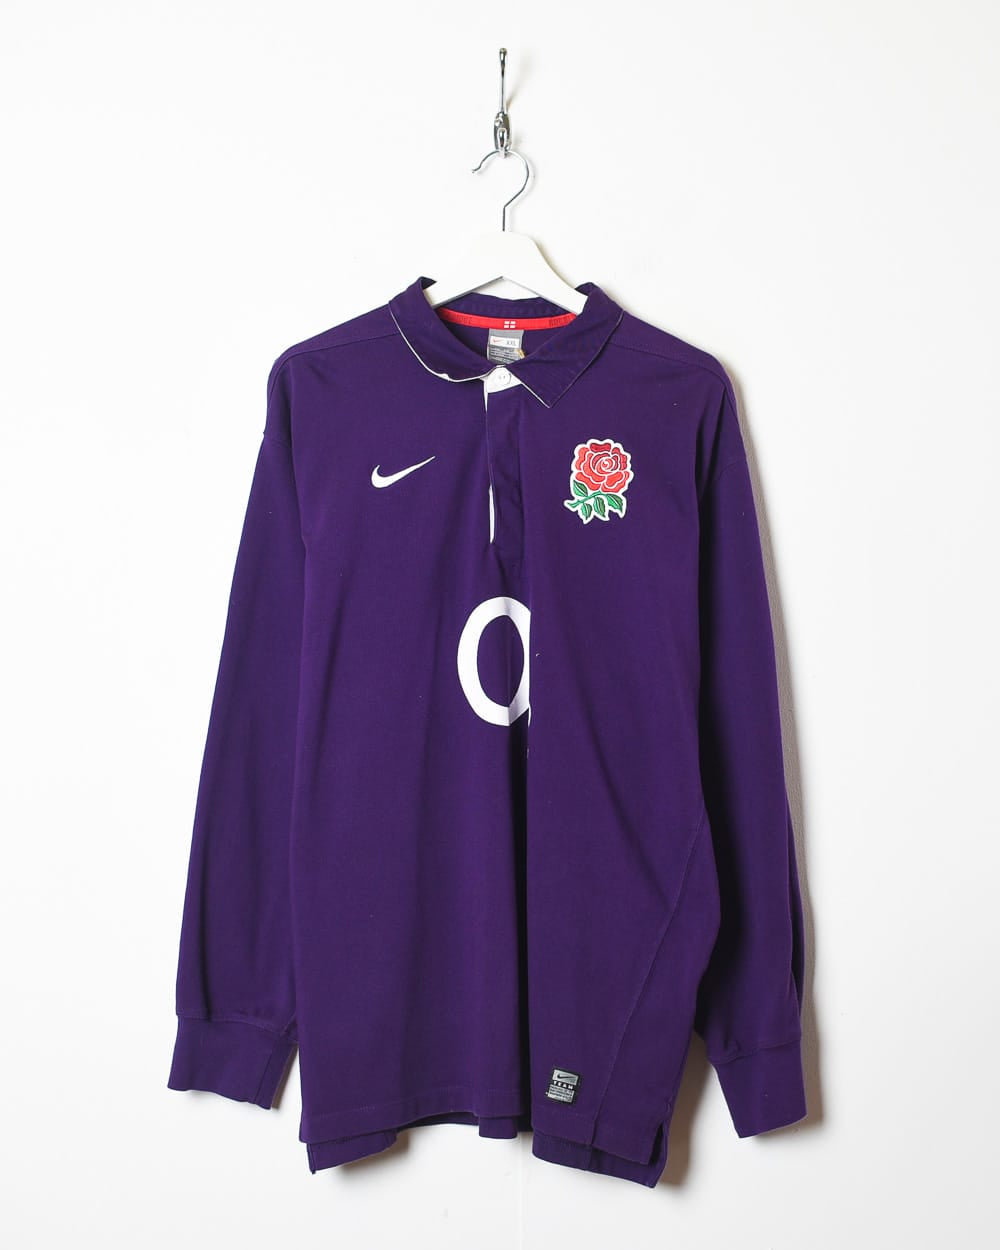 Purple Nike Team England Rugby Rugby Shirt - XX-Large